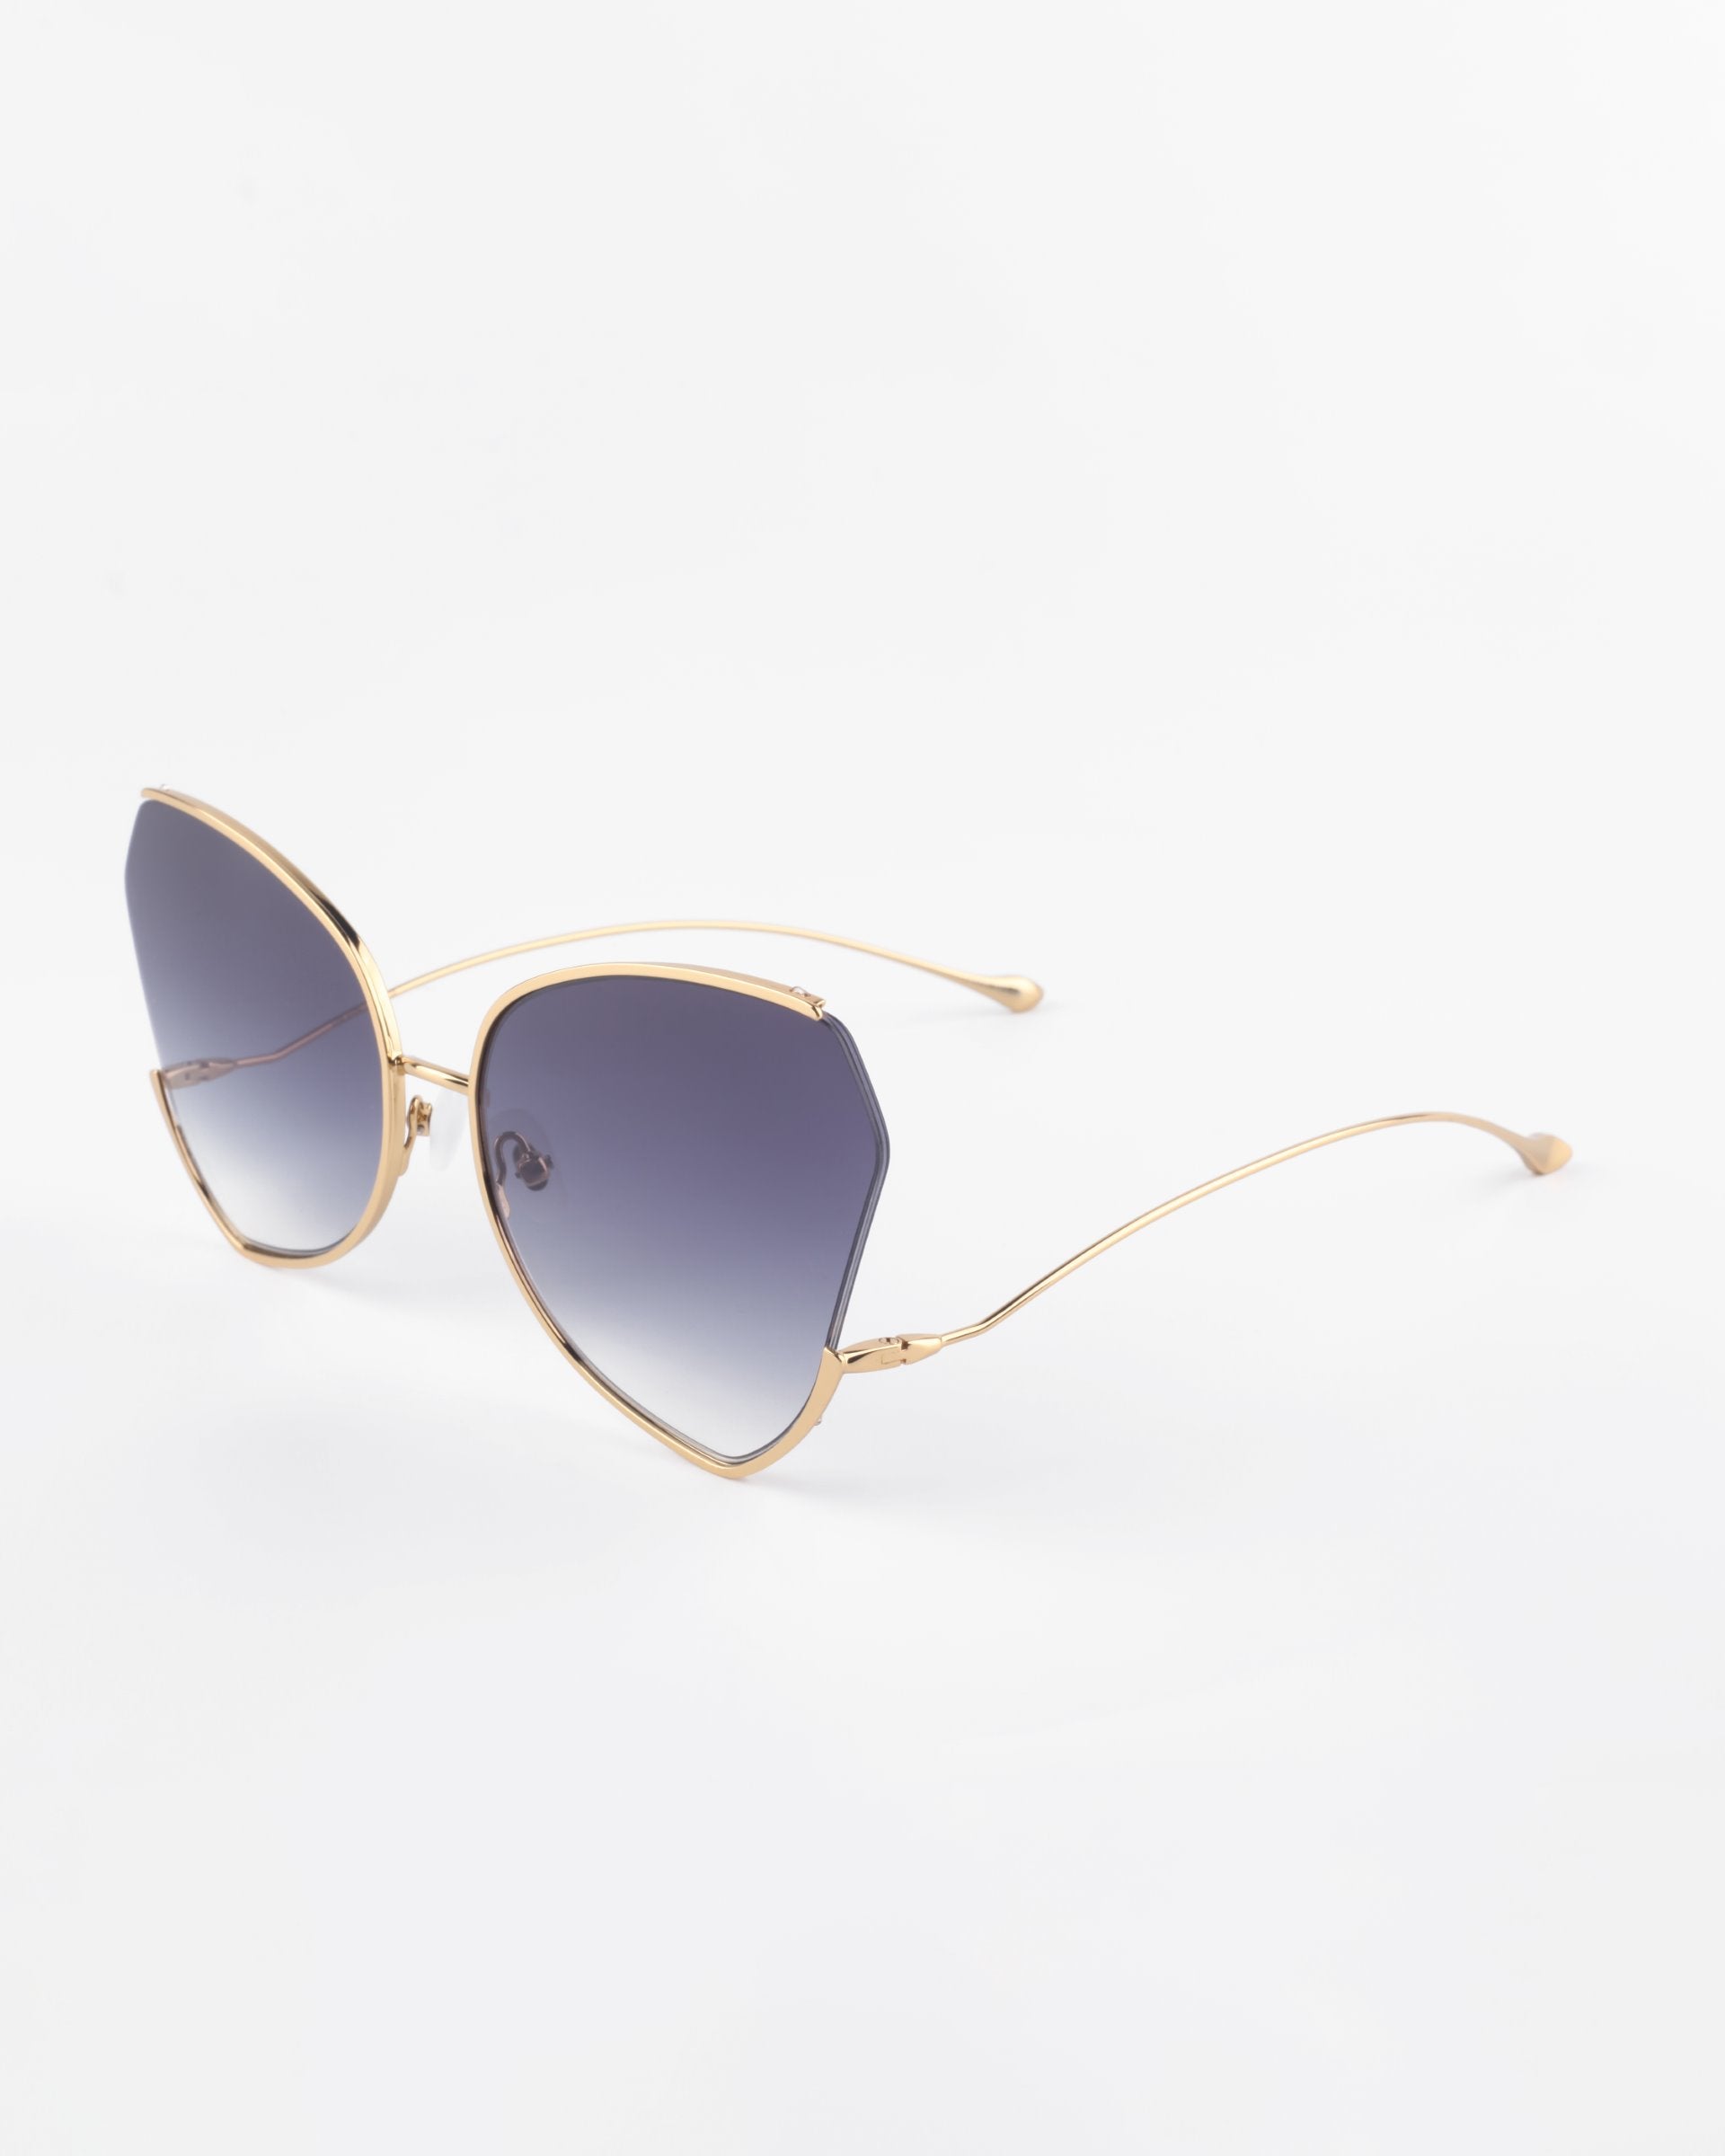 A pair of For Art&#39;s Sake® Watercolour sunglasses with gold-plated stainless steel frames and large, gradient gray ombré lenses. The design features a slight cat-eye shape, creating a fashionable and elegant look against a plain white background.